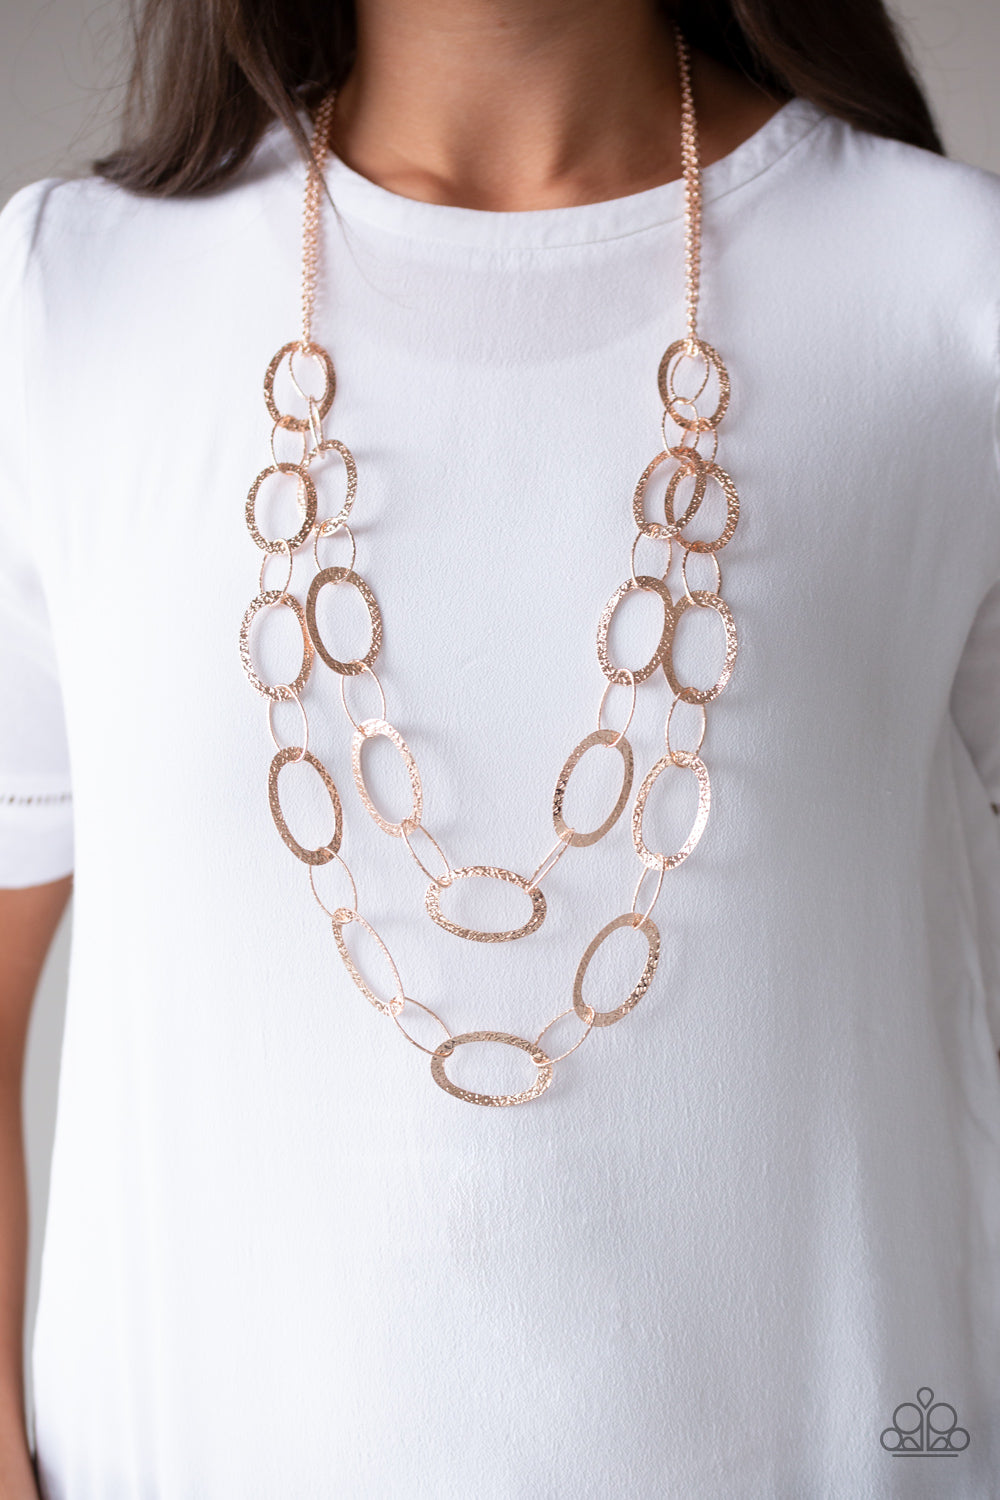 Paparazzi Glimmer Goals - Rose Gold - Necklace and Earrings - 2019 Summer Party Exclusive - $5 Jewelry With Ashley Swint